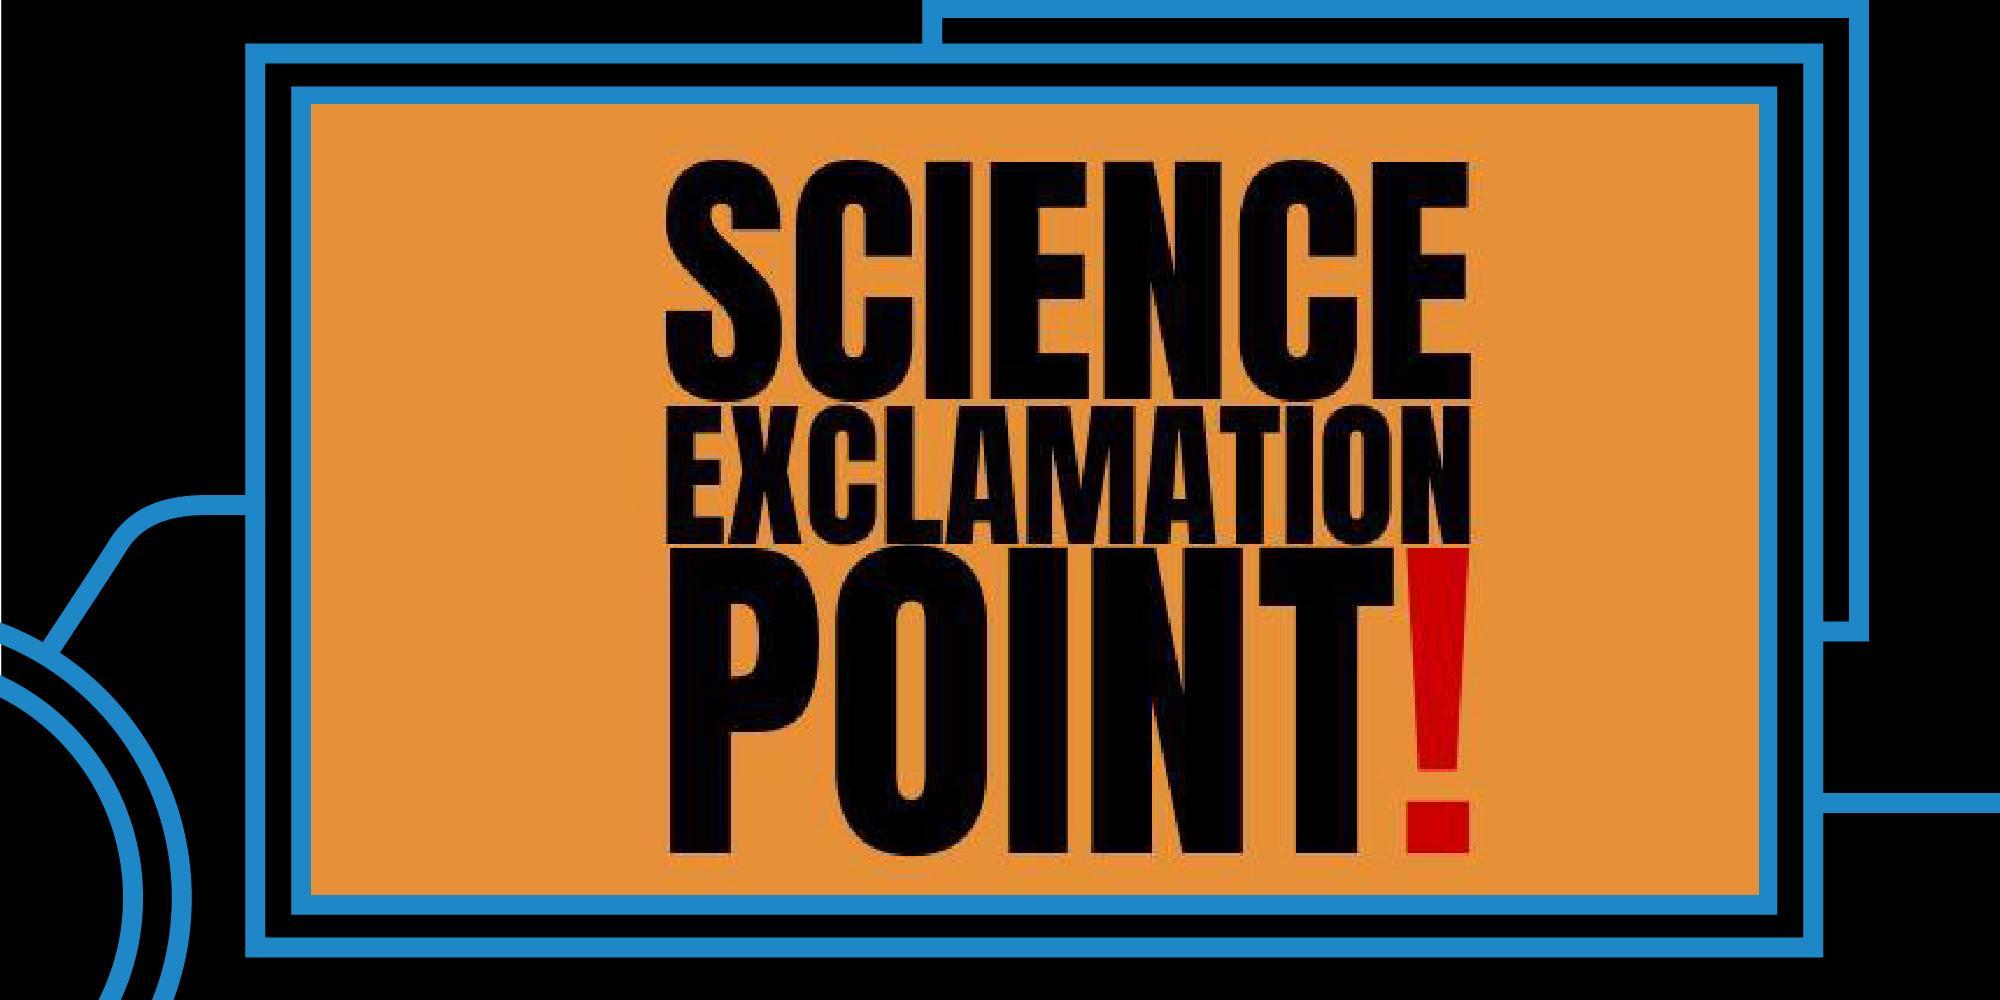 Science Exclamation Point